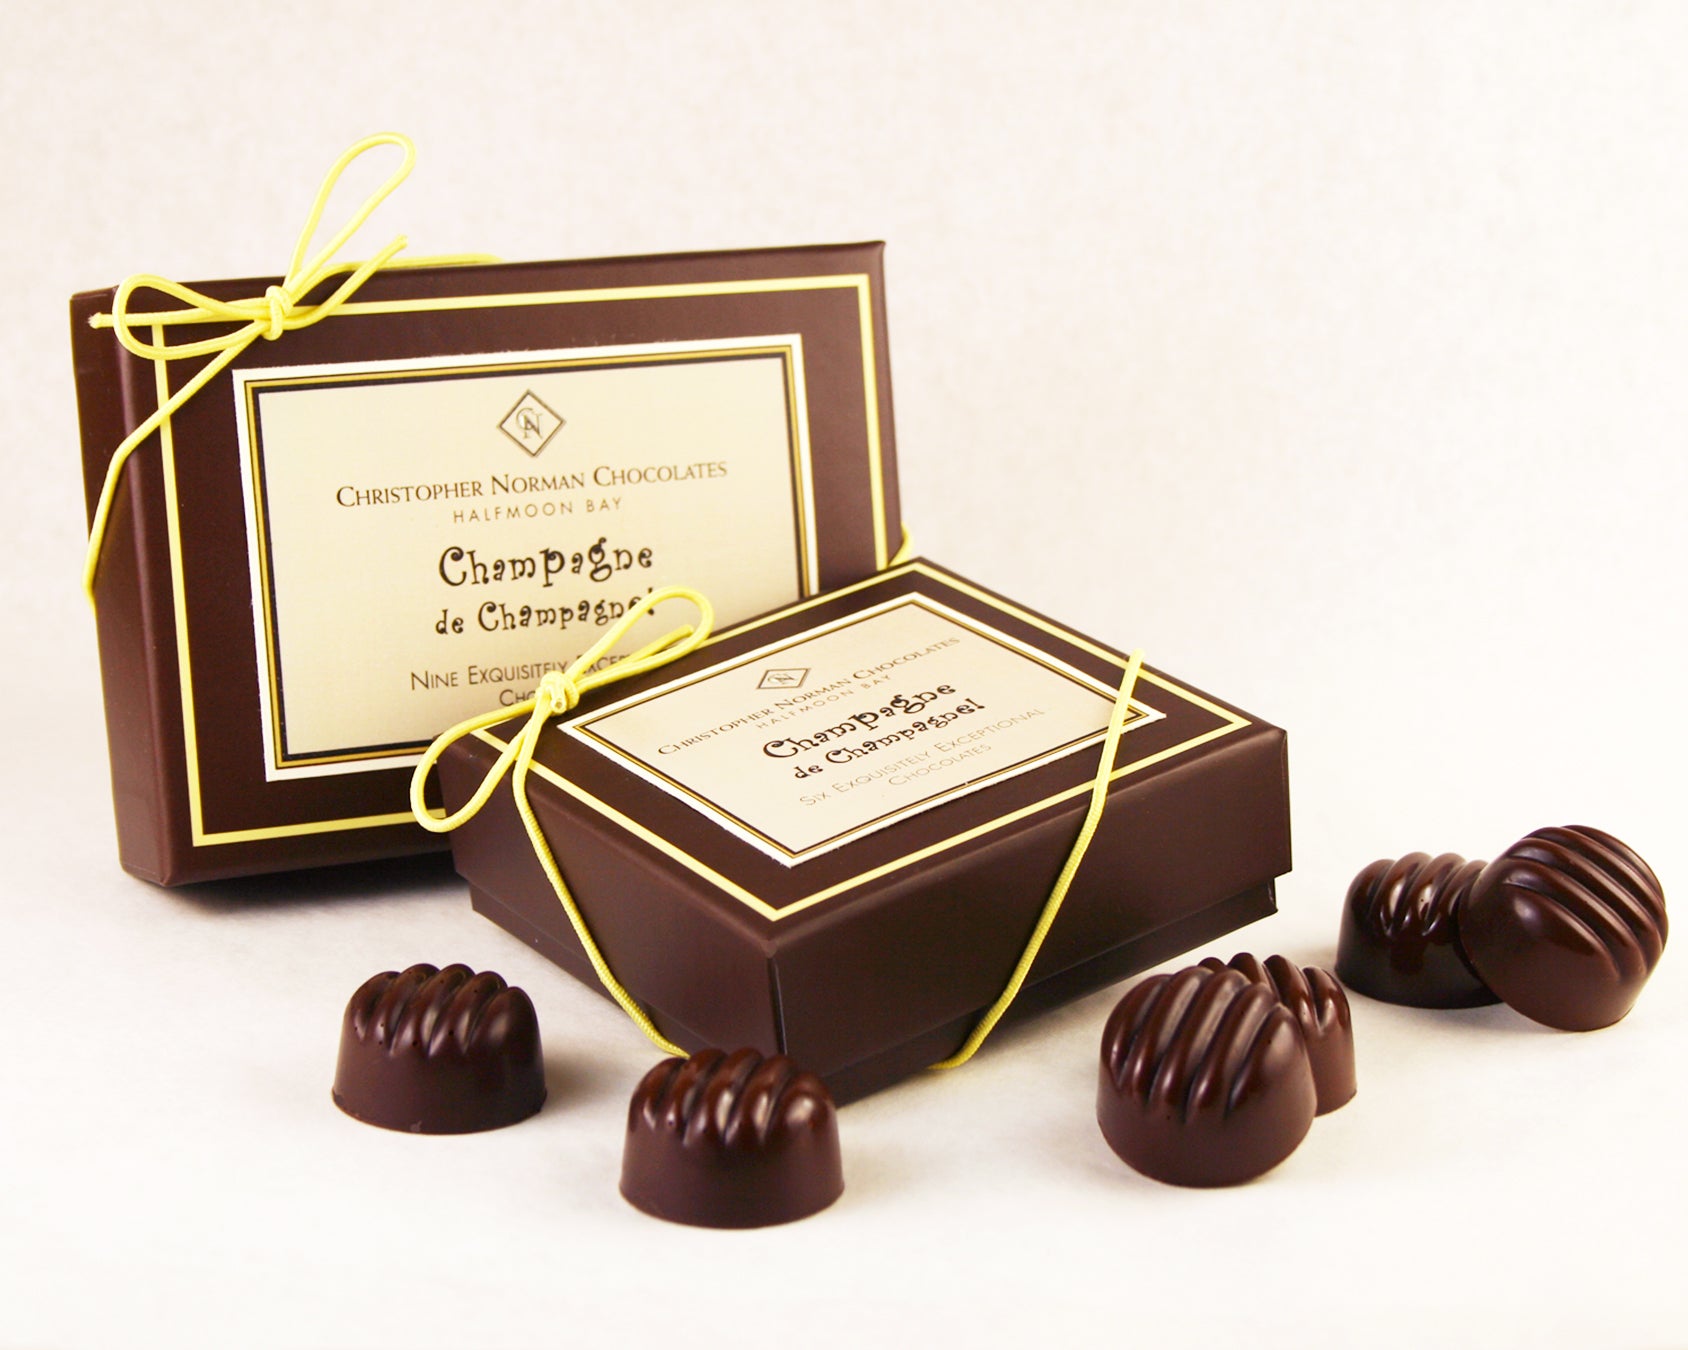 Champagne Chocolate Truffles - Box of 9 pieces